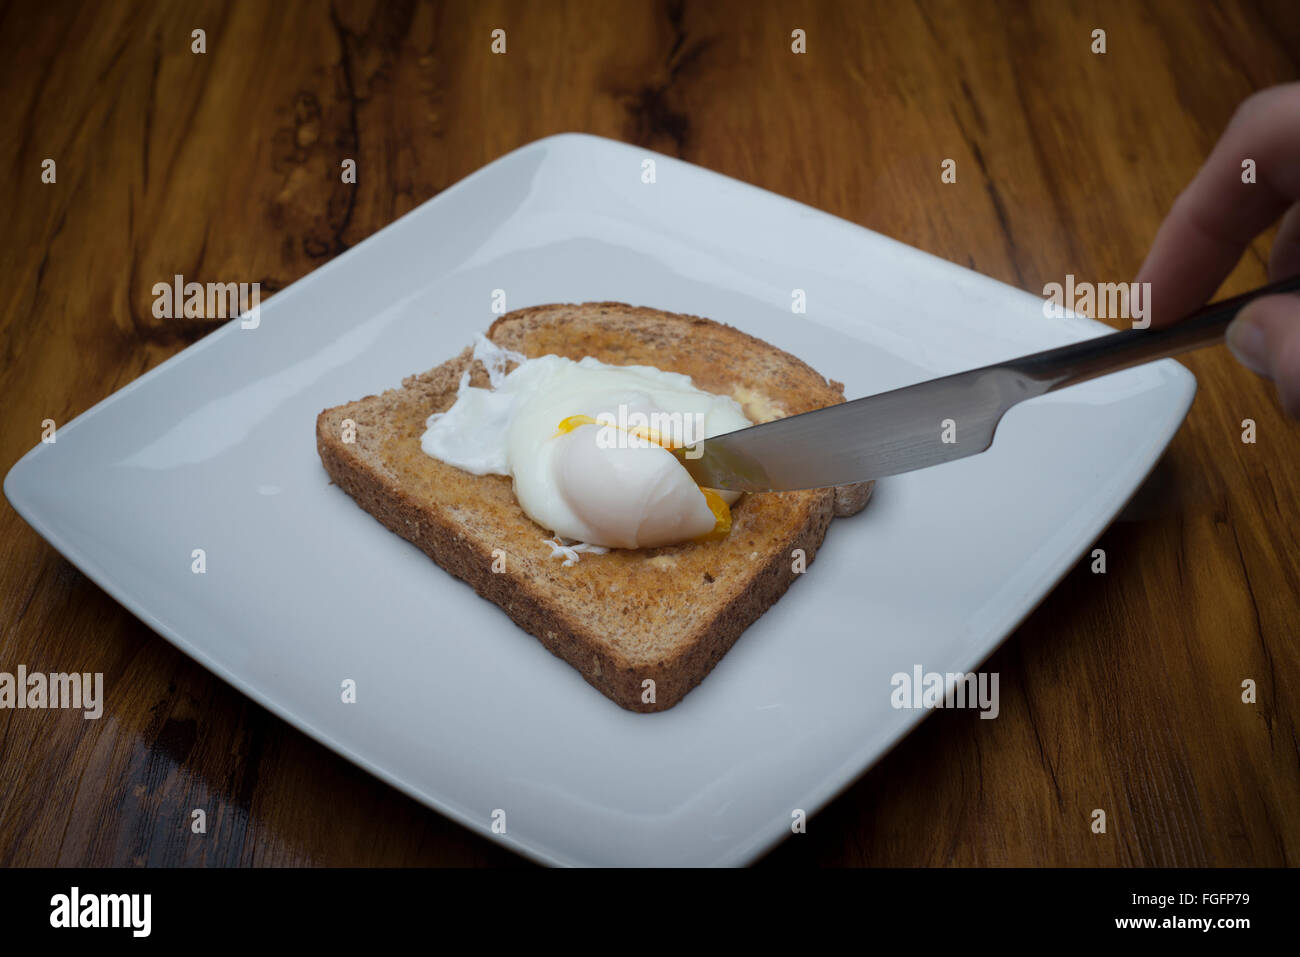 a knife cutting into a poached egg on toast Stock Photo